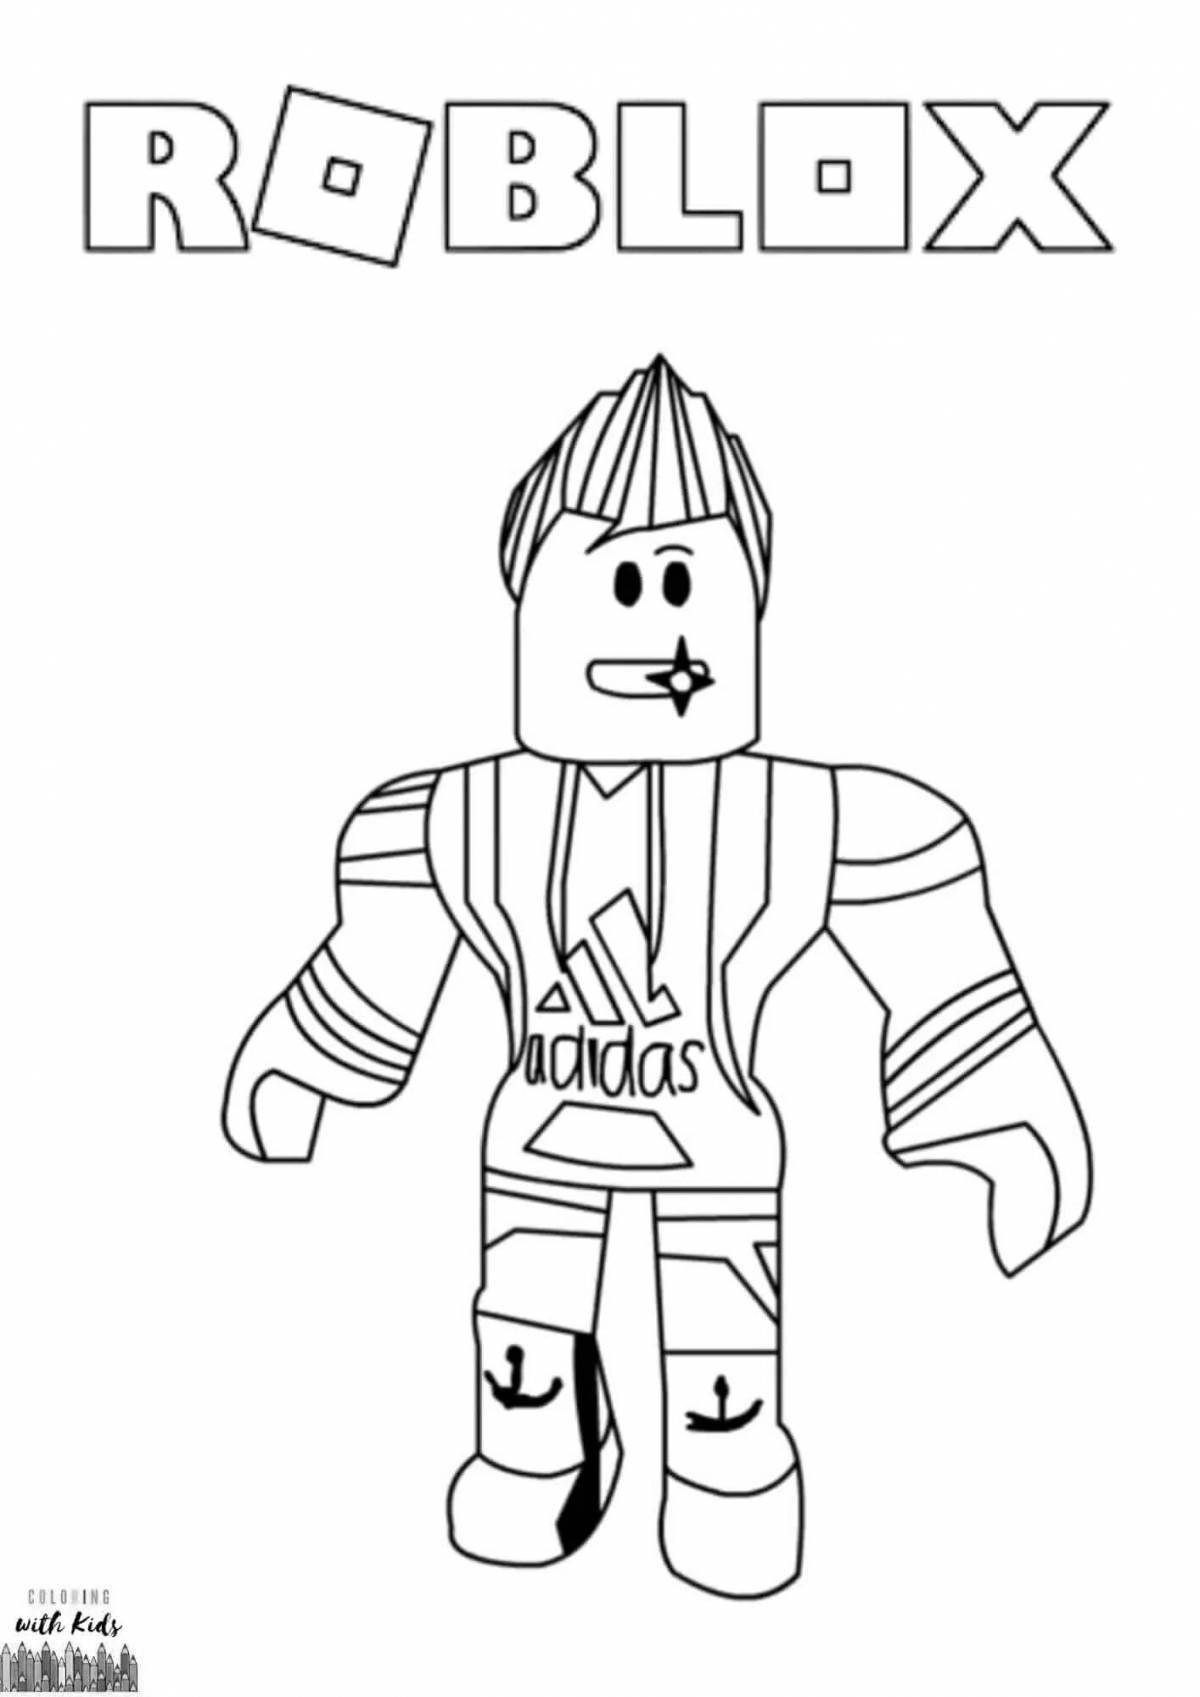 Detailed roblox brookhaven coloring page